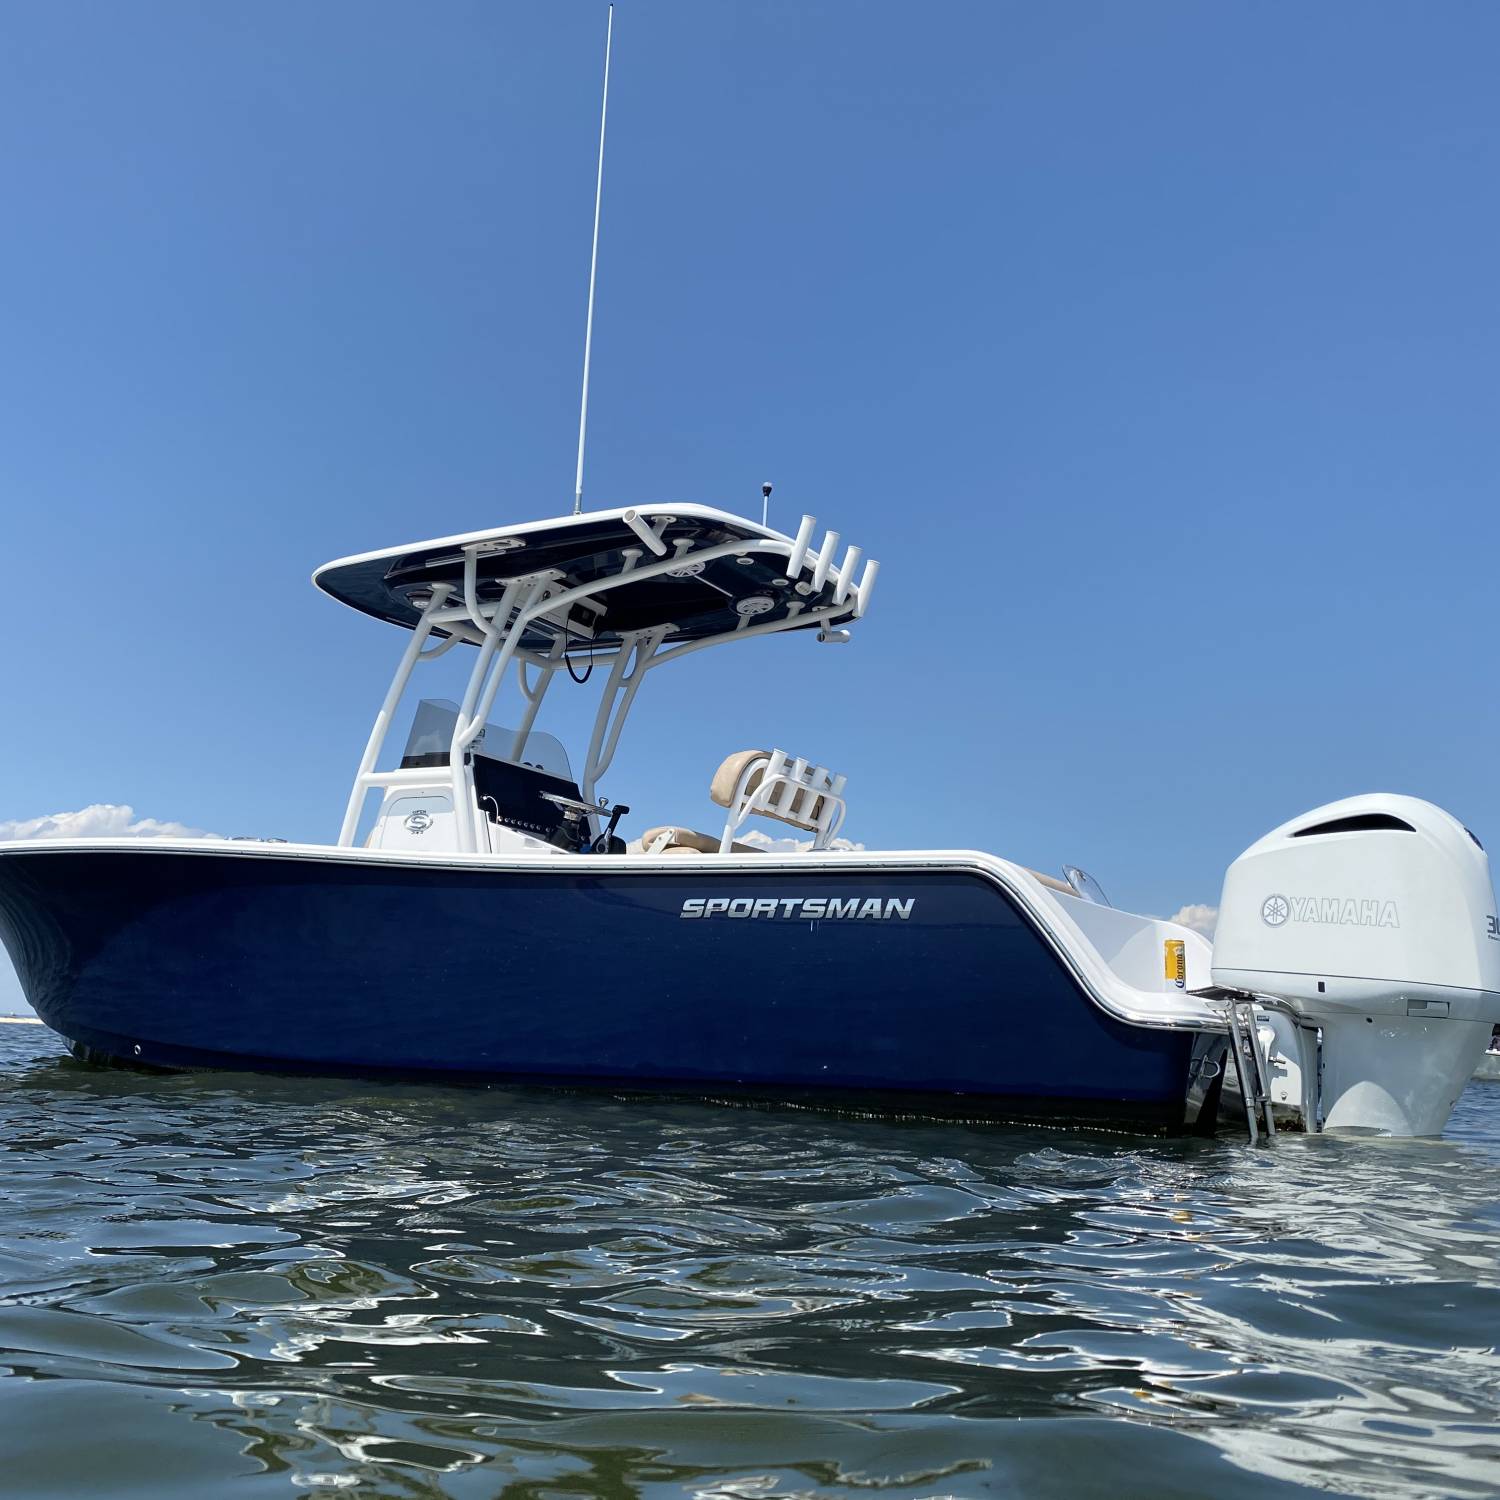 Title: Coronas and Boats - On board their Sportsman Open 242 Center Console - Location: Sand city Island, long island. Participating in the Photo Contest #SportsmanOctober2021